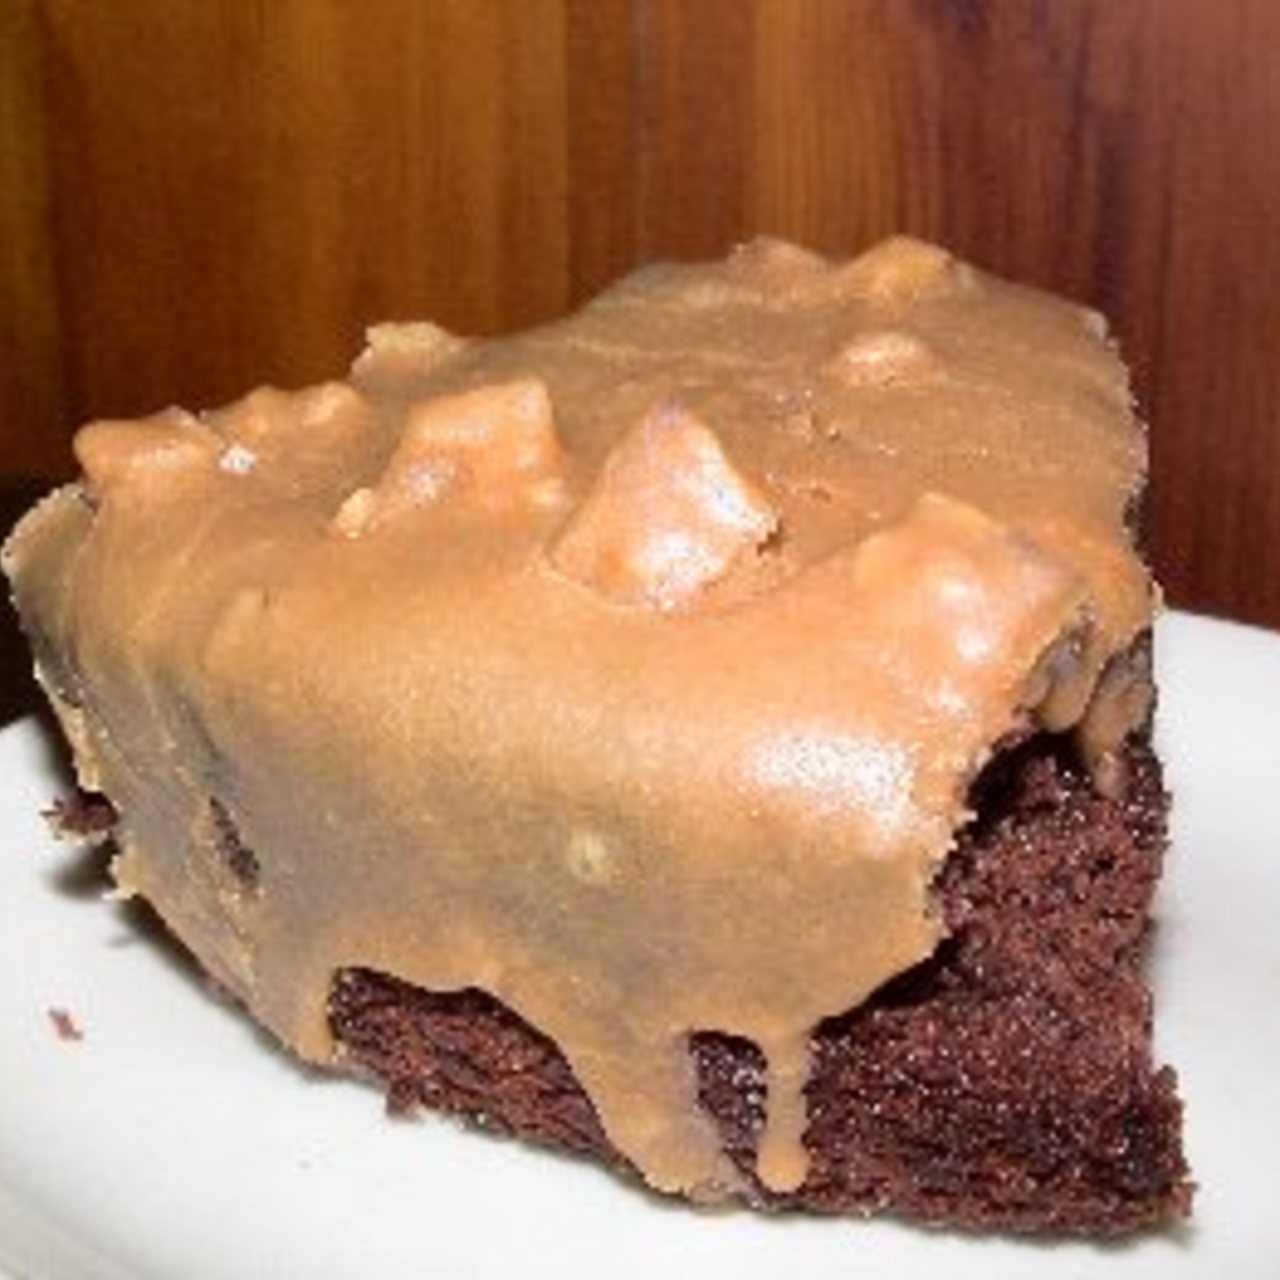 Black Magic Snack Cake - Swoon Worthy! - That Skinny Chick Can Bake